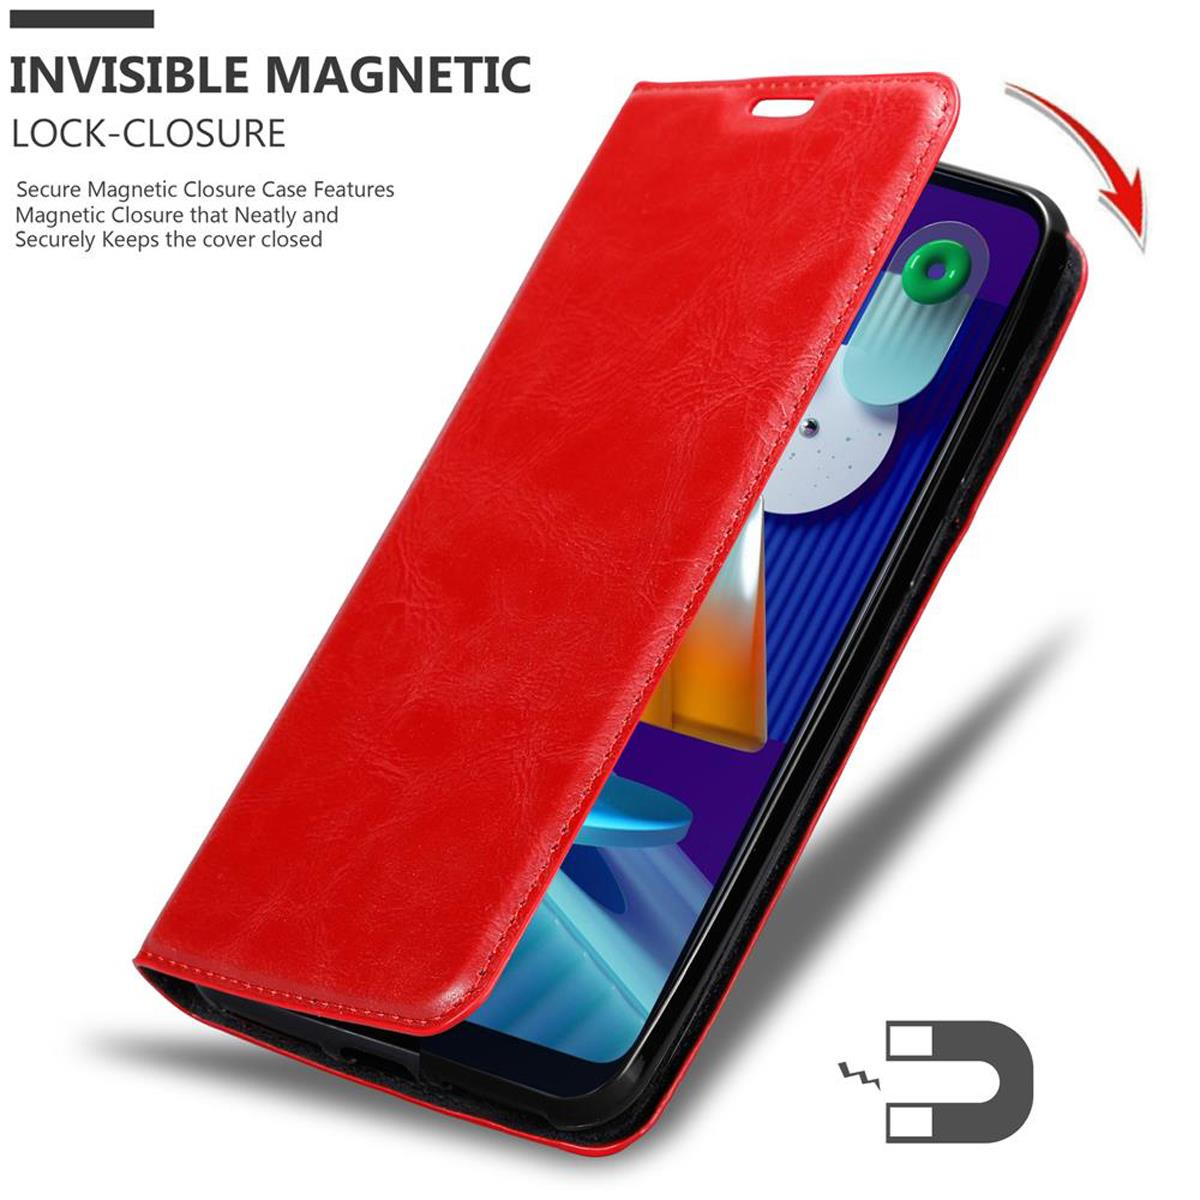 Samsung, Galaxy / Hülle CADORABO Invisible ROT M11, Bookcover, Book A11 APFEL Magnet,